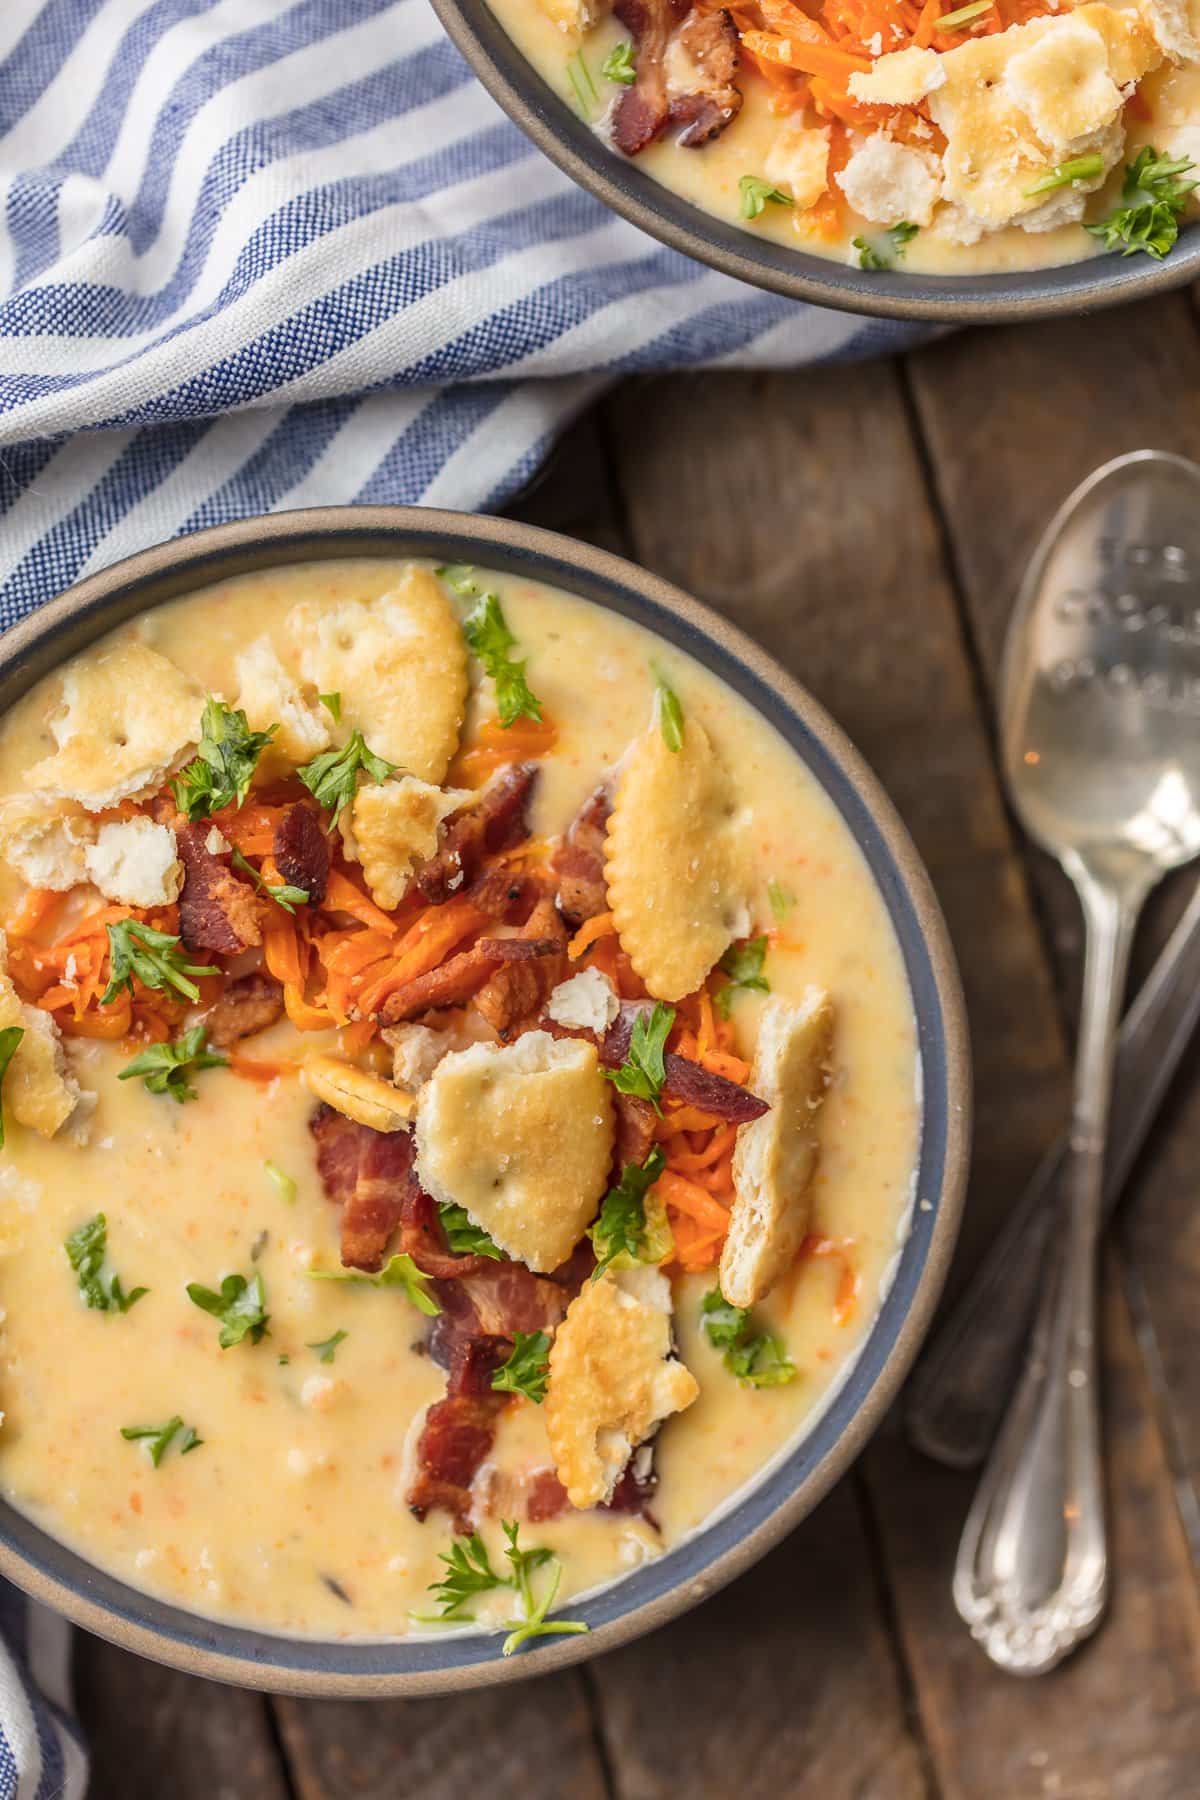 Hash Brown Potato Soup, or Potato Cheese Soup is an absolute Winter MUST MAKE! The ultimate comfort food soup made in minutes. This Potato Soup is loaded with cheese and made with frozen hash browns! It's a delicious twist or a classic Potato Soup Recipe. So cheesy and delicious. Topped with sautÃ©edÂ carrots and bacon for extra flavor!